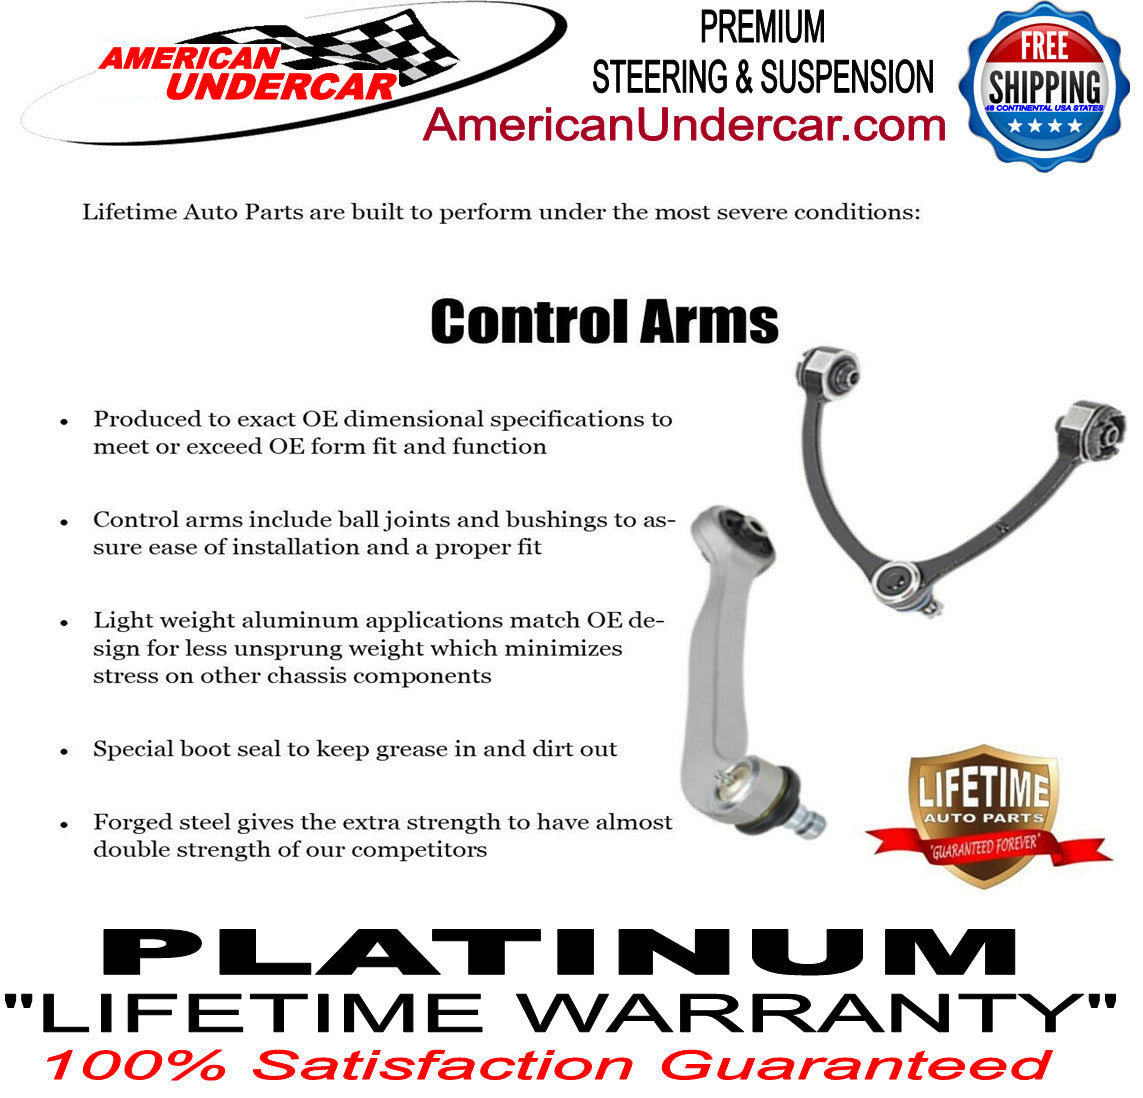 Lifetime Ball Joint Suspension Kit for 1985-1994 Ford F250 4x4 4600lb Axle